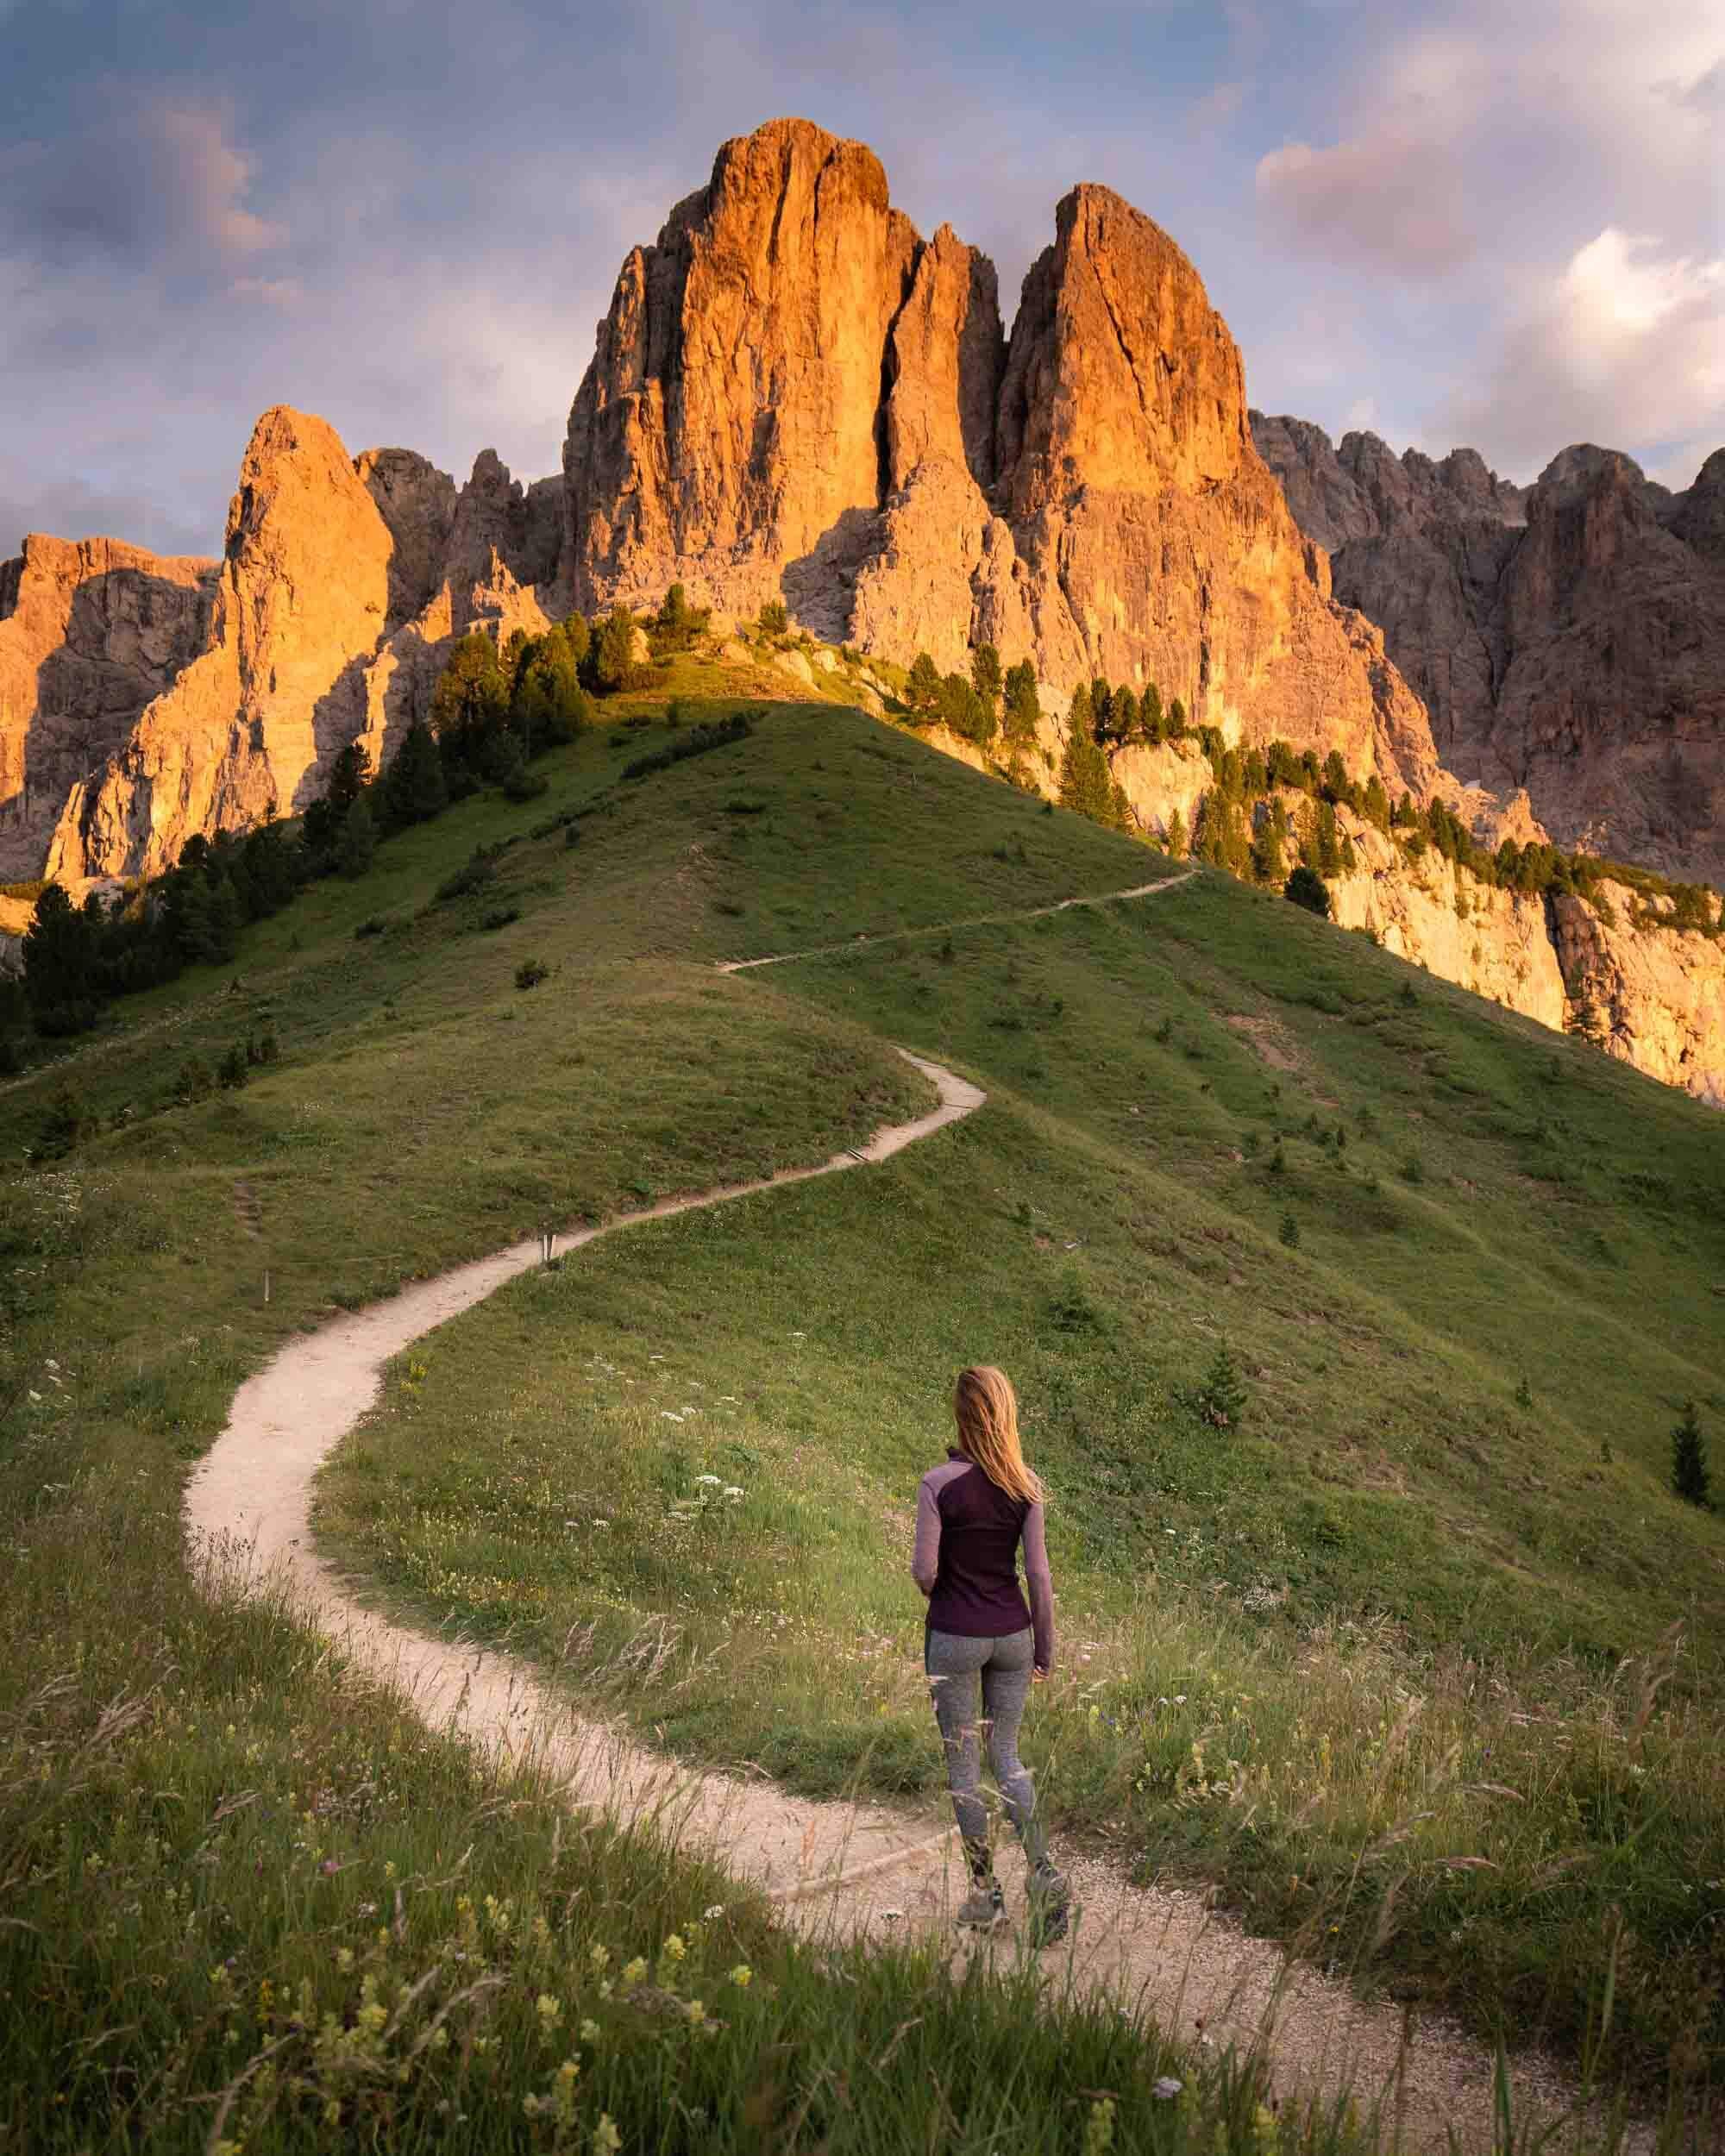 The light just got better and better as the sun set over Pass Gardena in the Italian Dolomites.